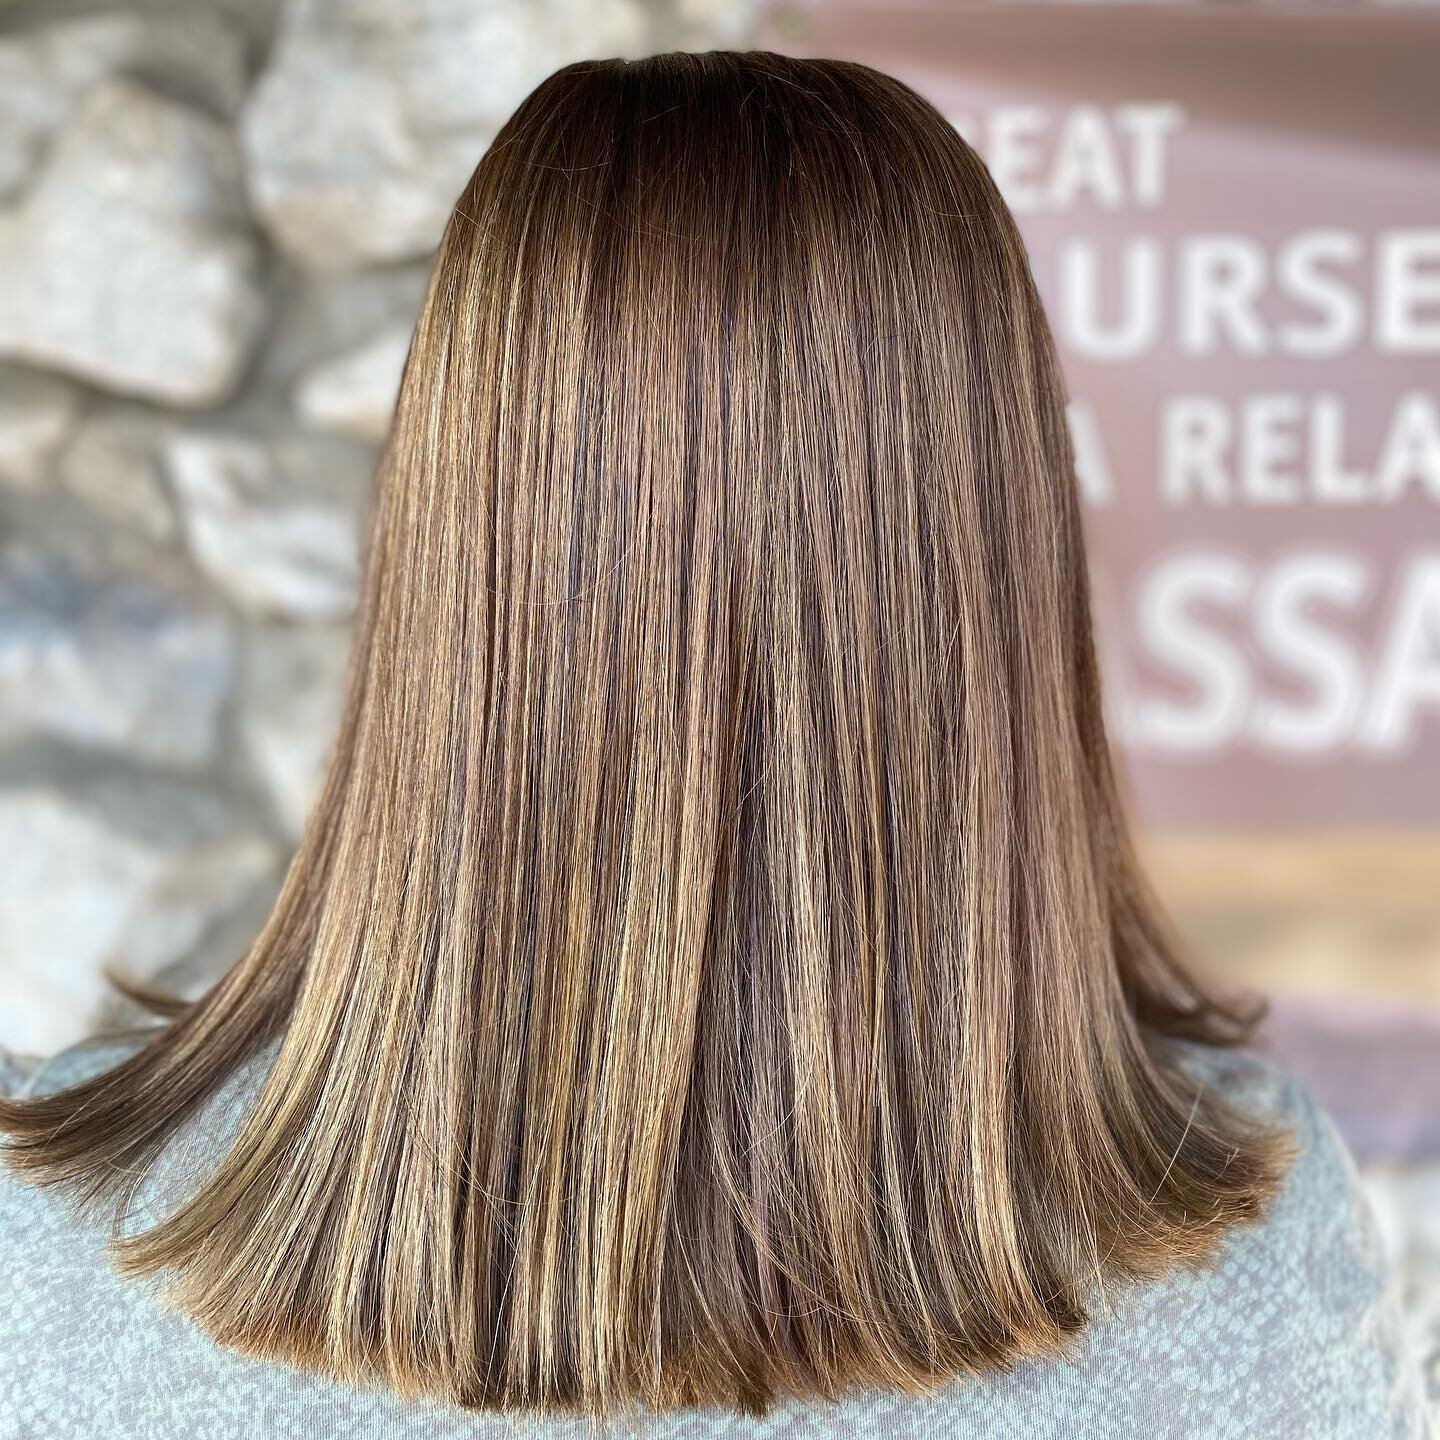 Gorgeous set of lowlights done by our newest stylist, Libby 🌿
.
Used: @oligopro calura in shade 6G
.
#serenitysalonmishawaka